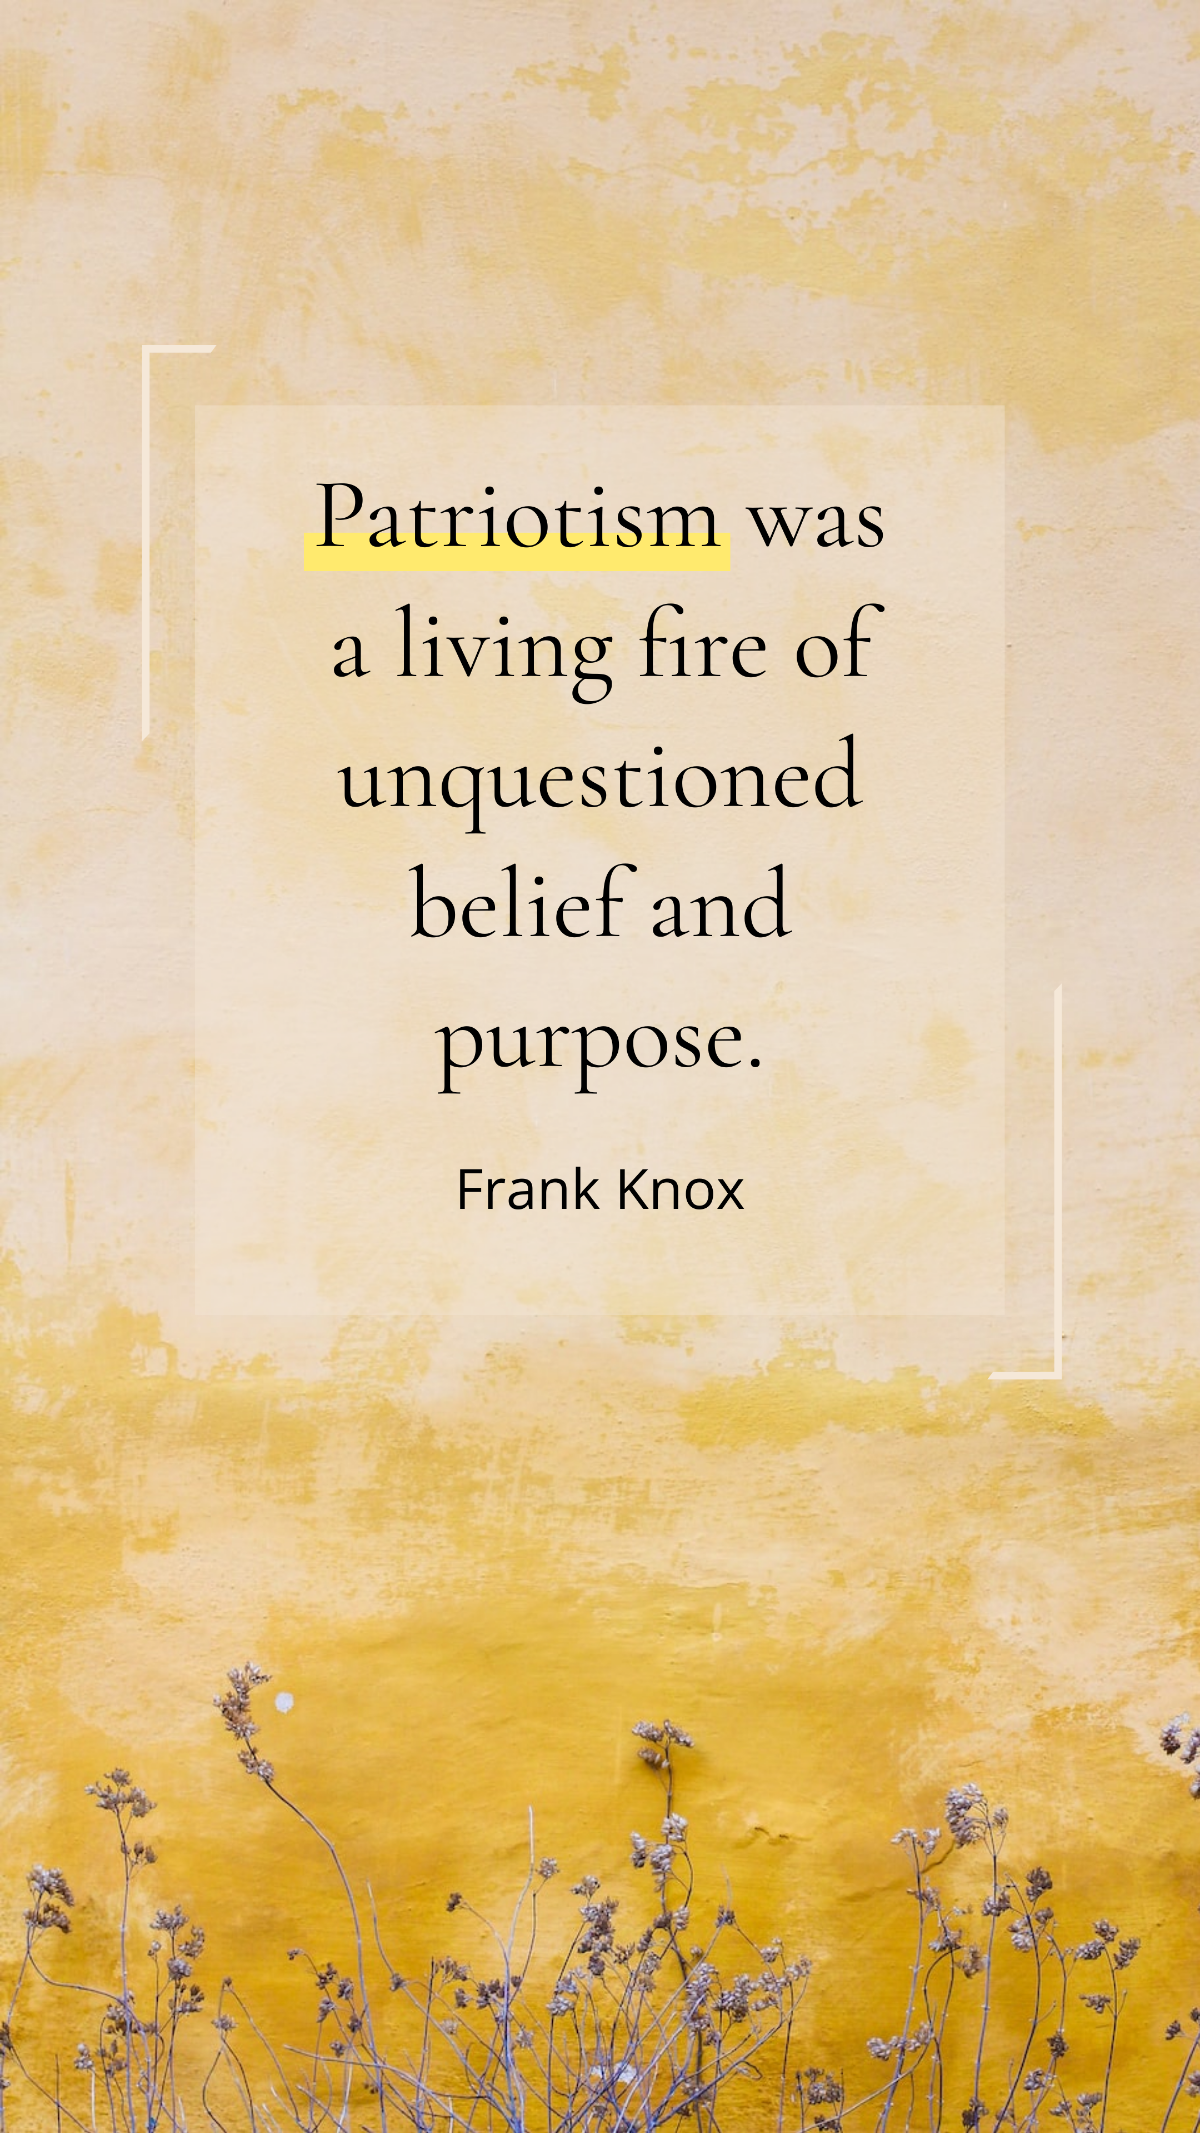 Frank Knox - Patriotism was a living fire of unquestioned belief and purpose.  Template